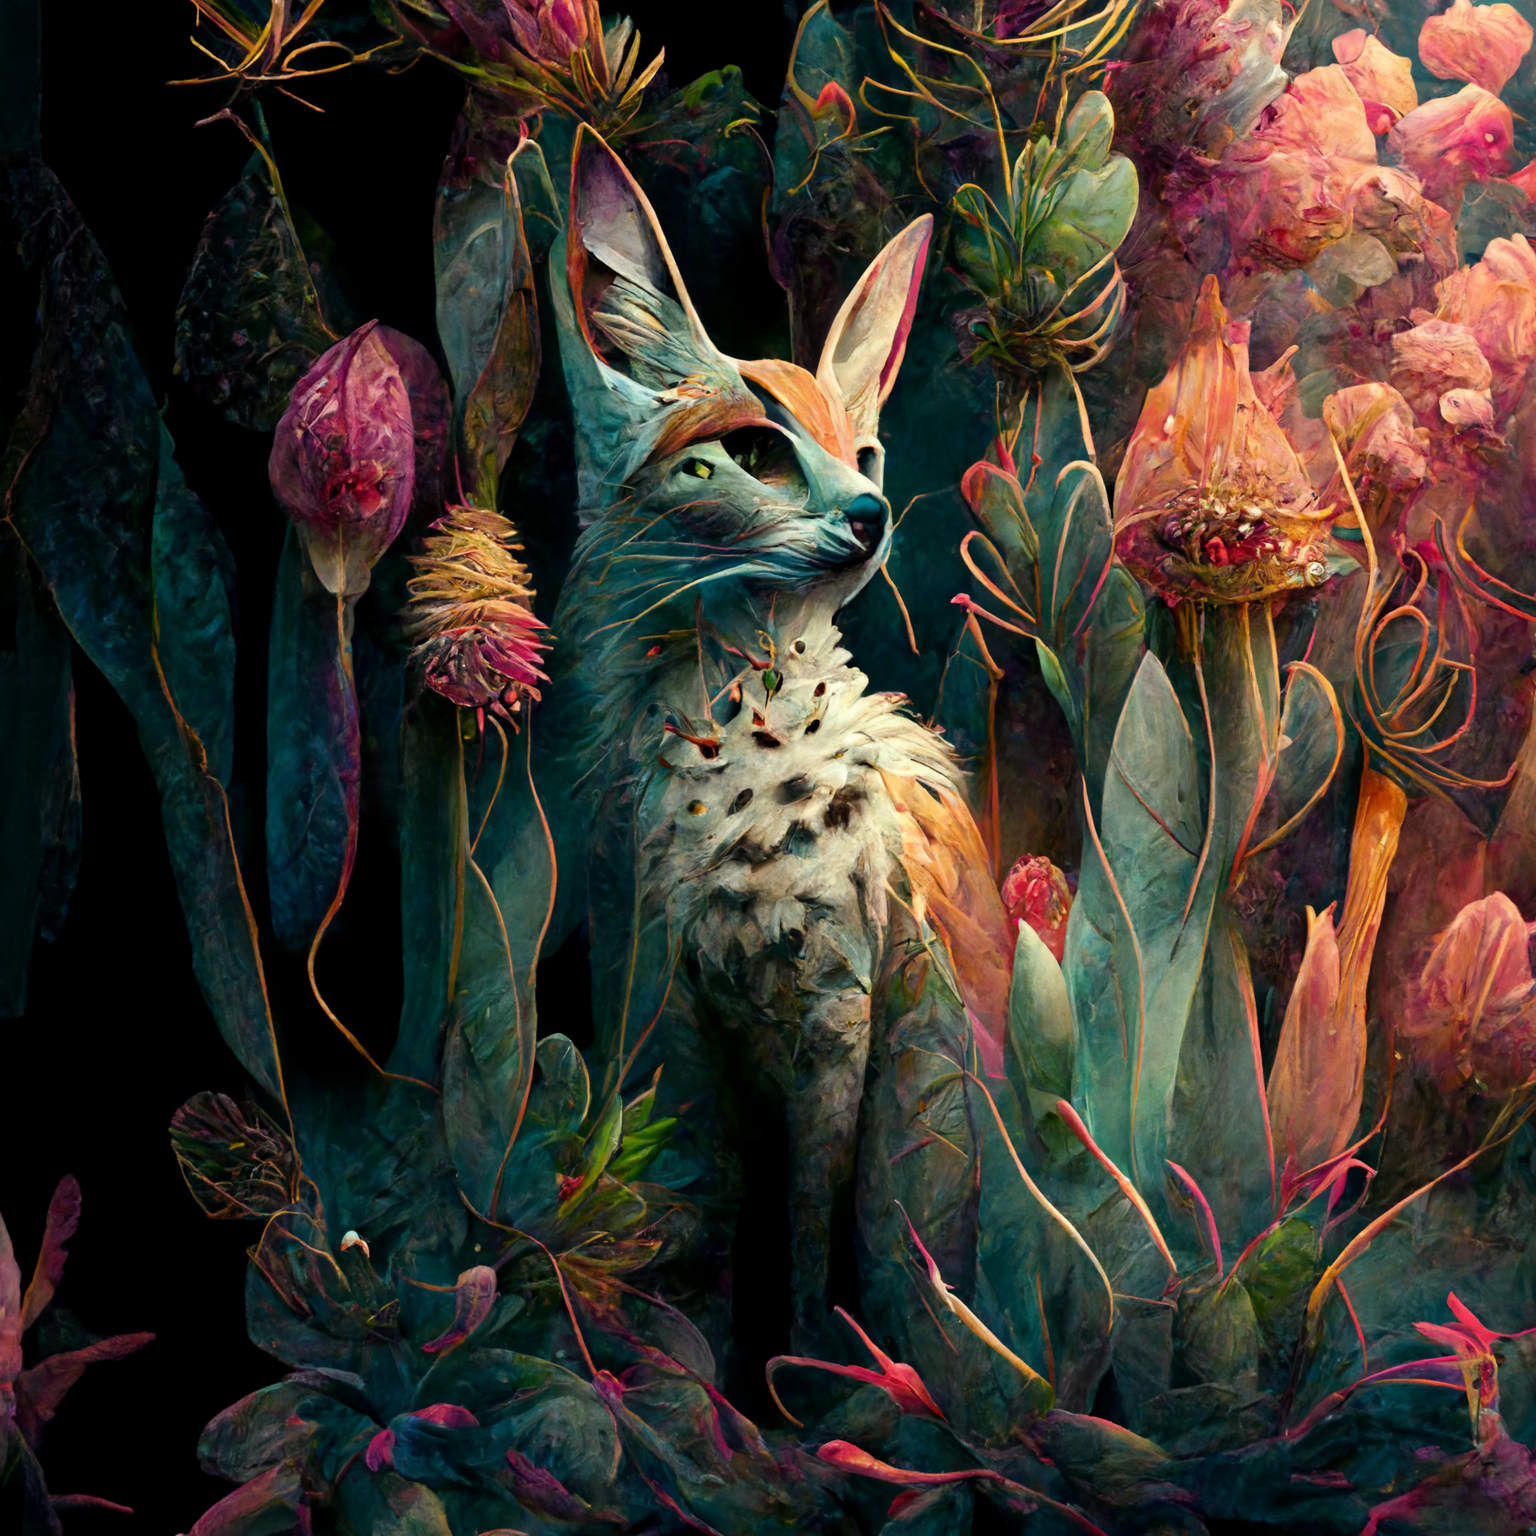 Stunning fox artwork sits in a meadow of florals, bringing the beauty of nature to life. Intricately designed and eye-catching, this artwork is the perfect addition to any nature lover's collection.